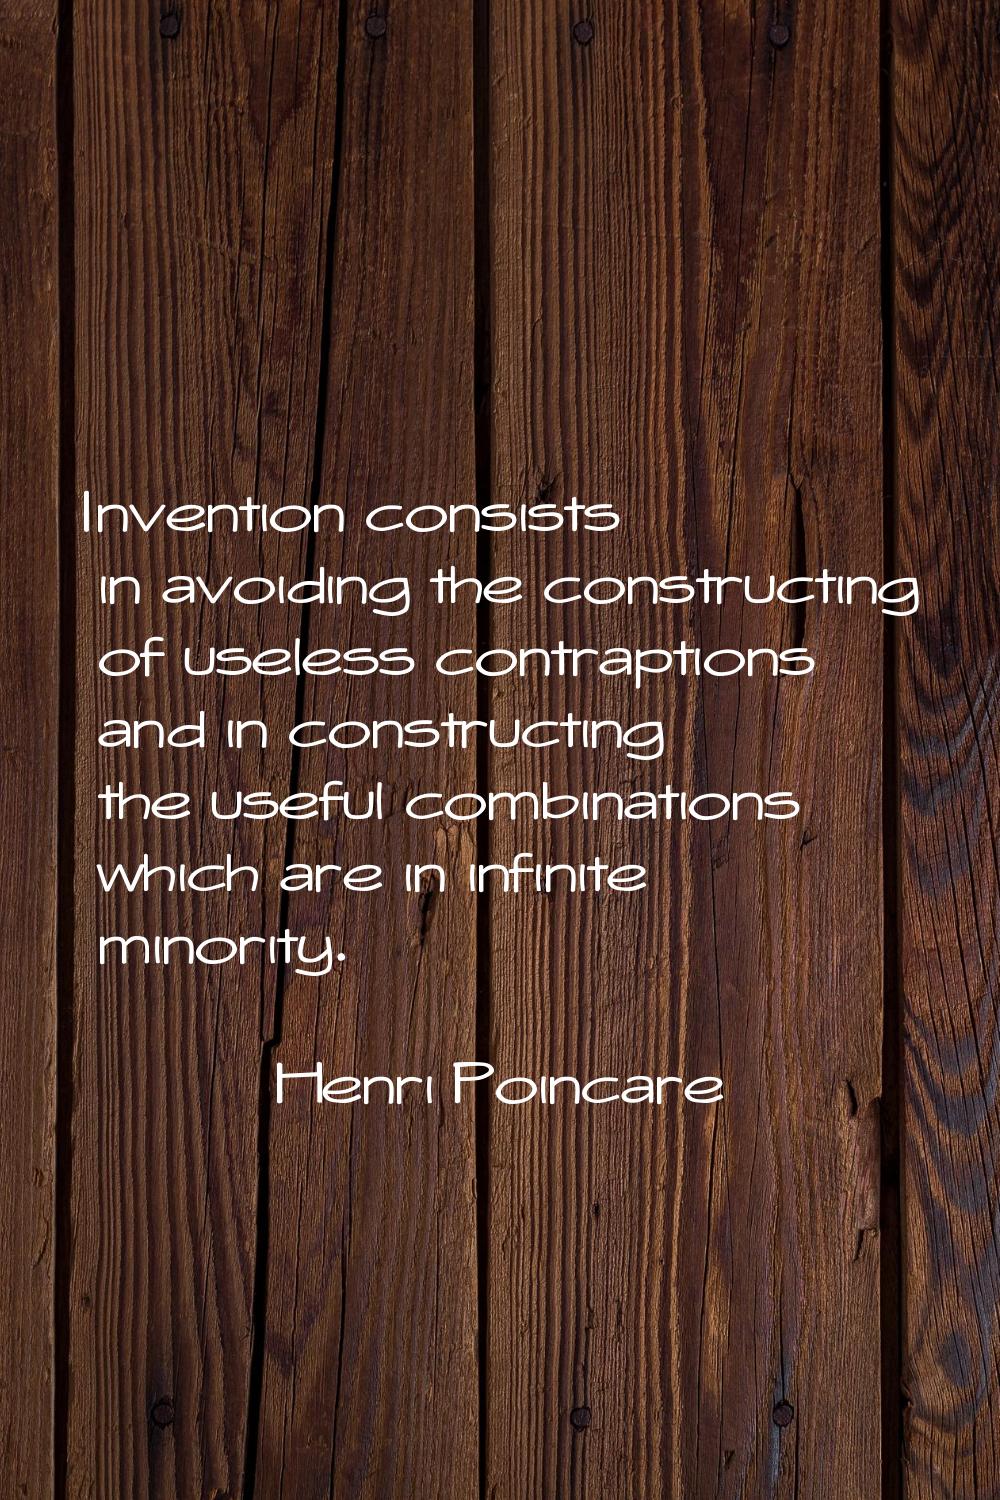 Invention consists in avoiding the constructing of useless contraptions and in constructing the use